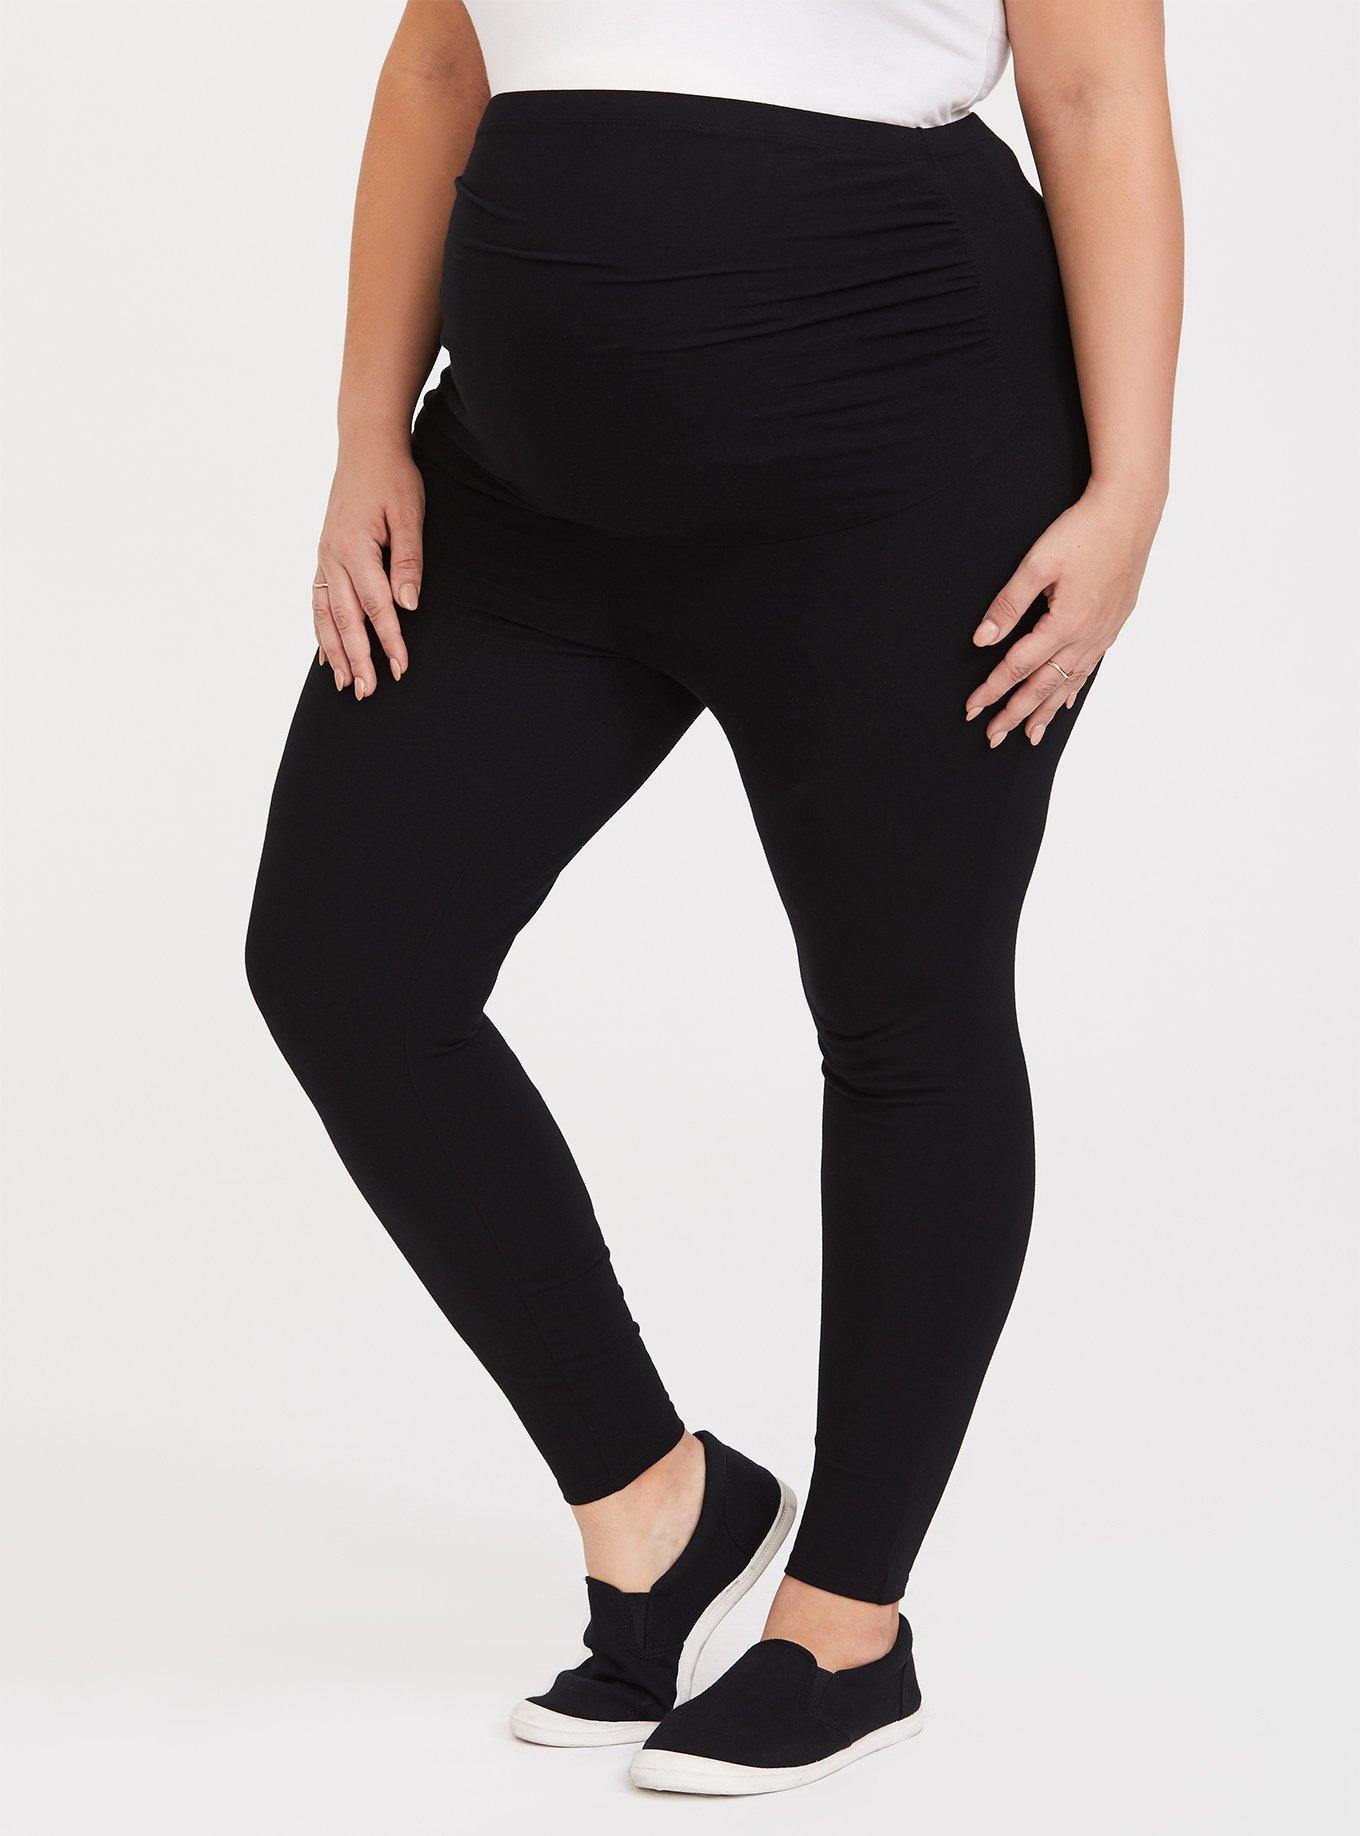 ASSETS by SPANX Women's Seamless Leggings - Black S 1 ct